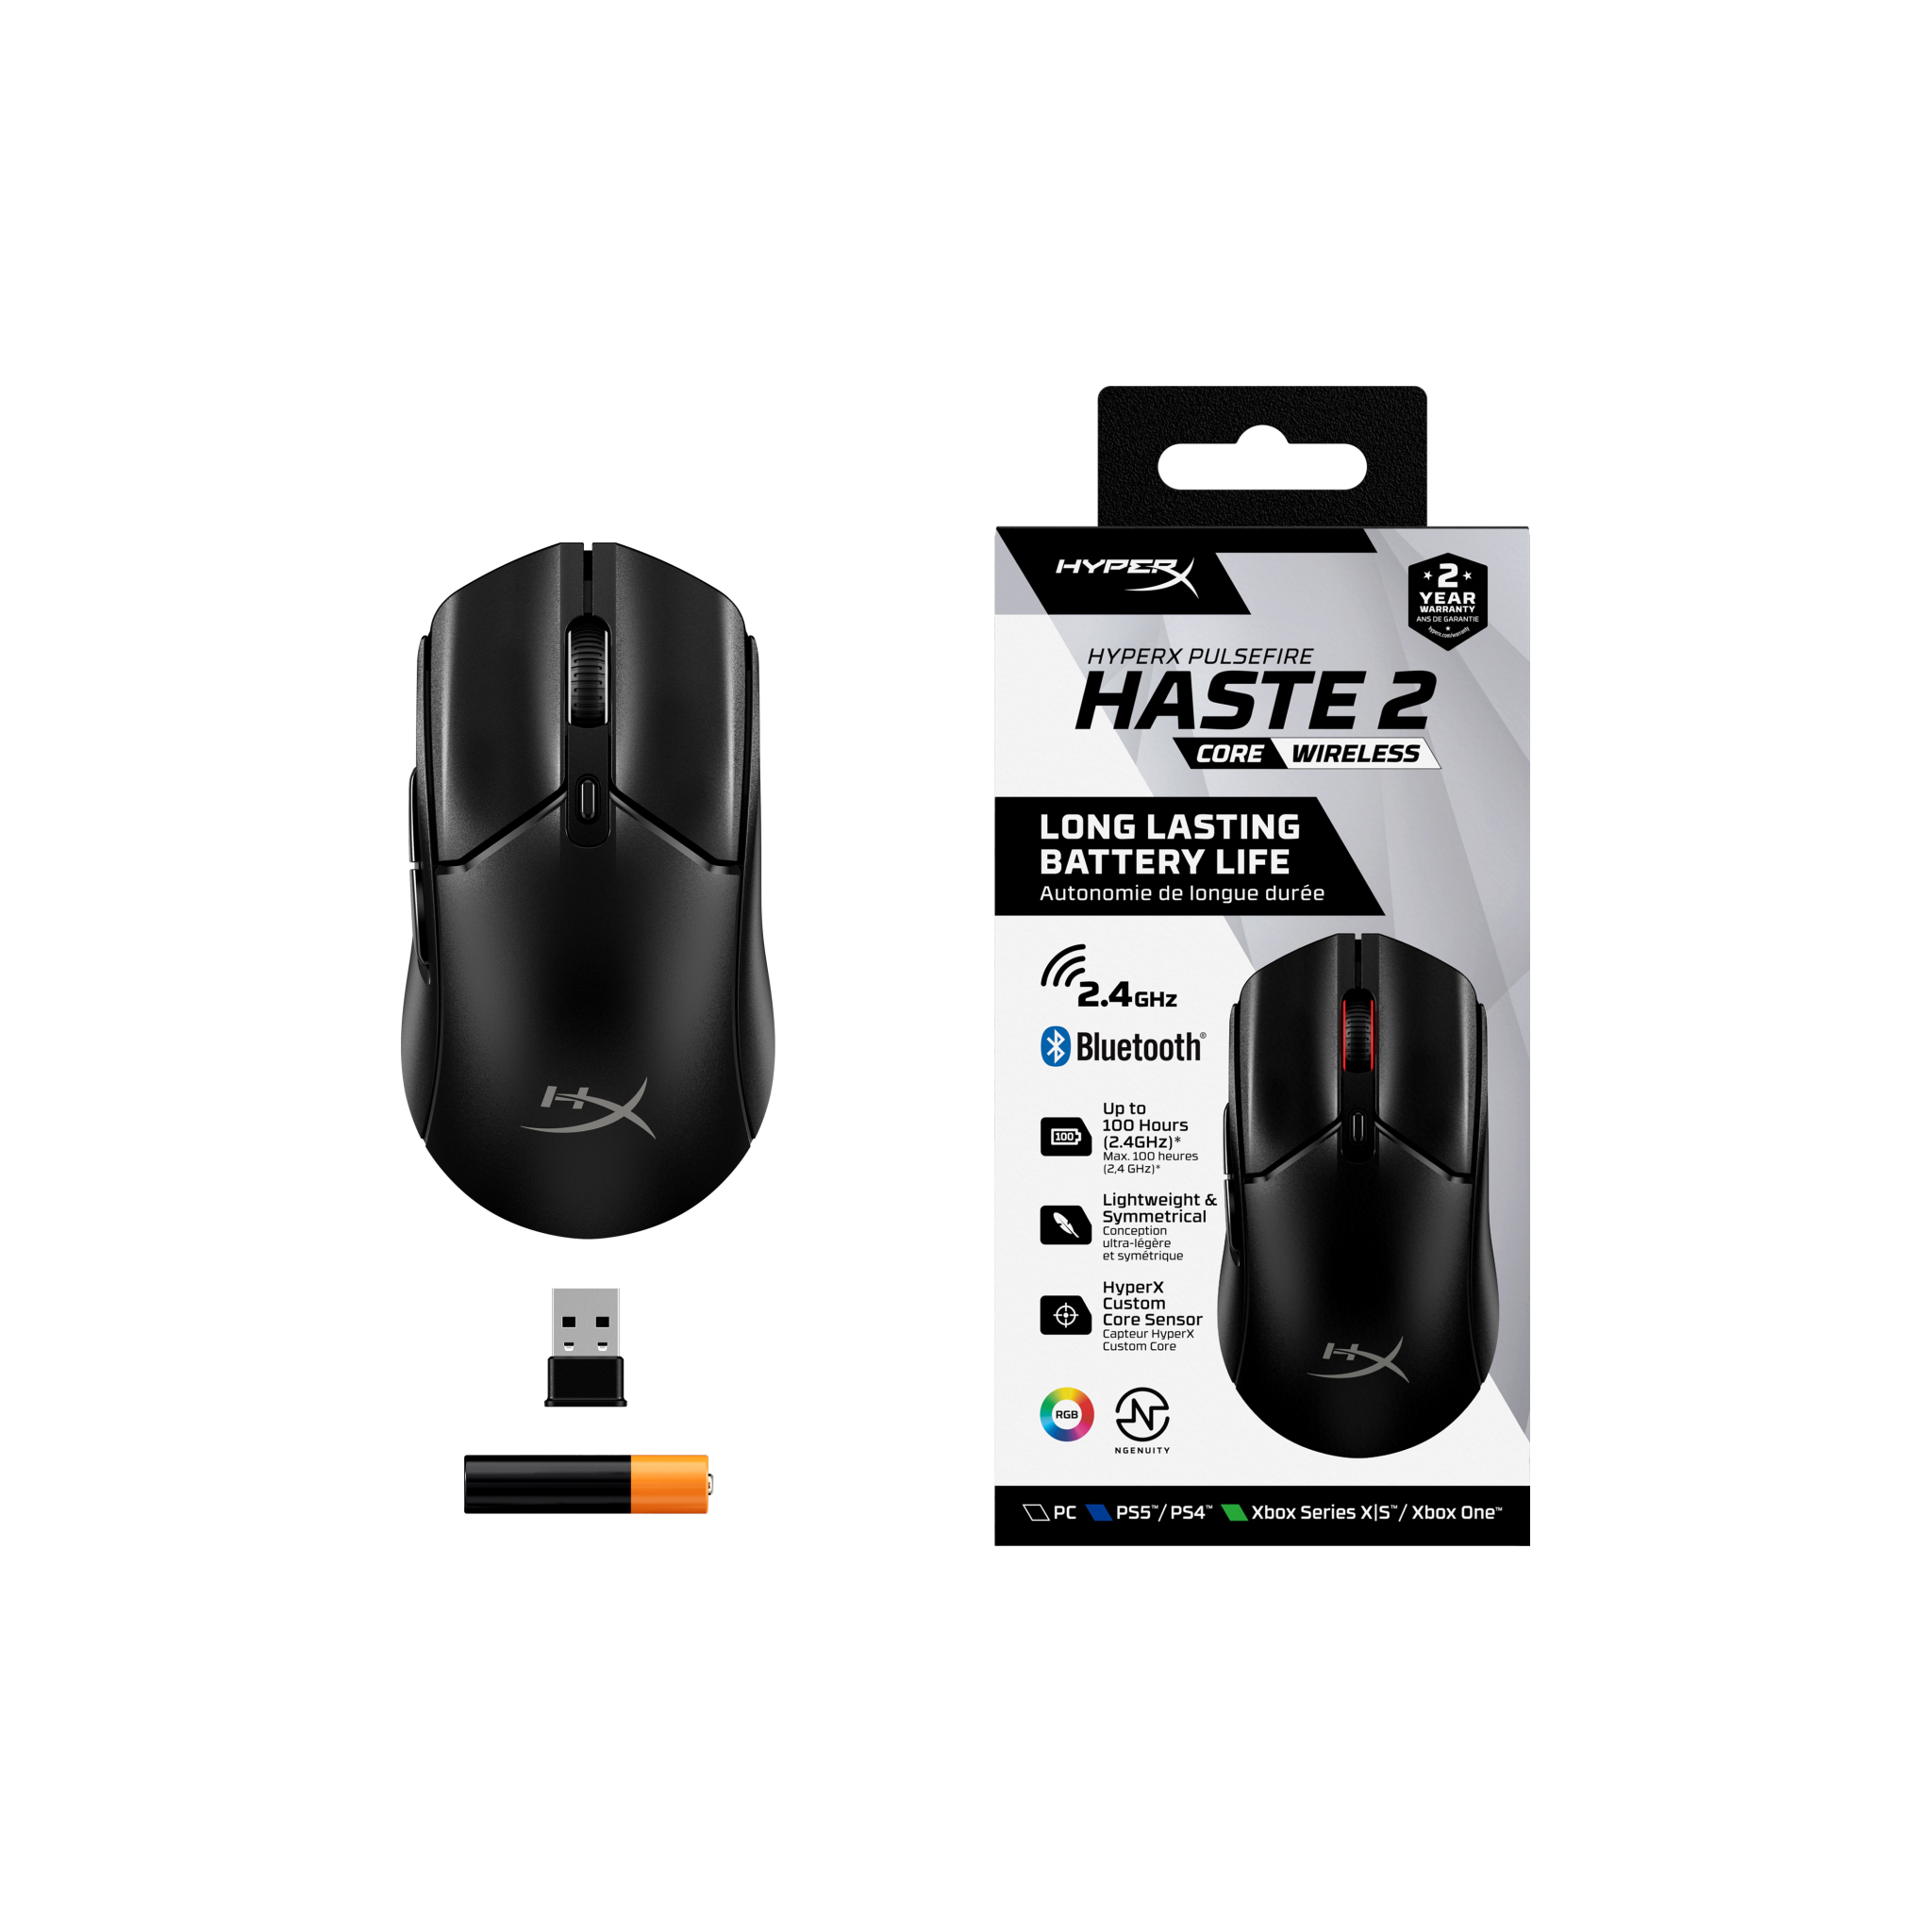 The HyperX Pulsefire Haste 2 Core wireless gaming mouse with box and bundled accessories. 